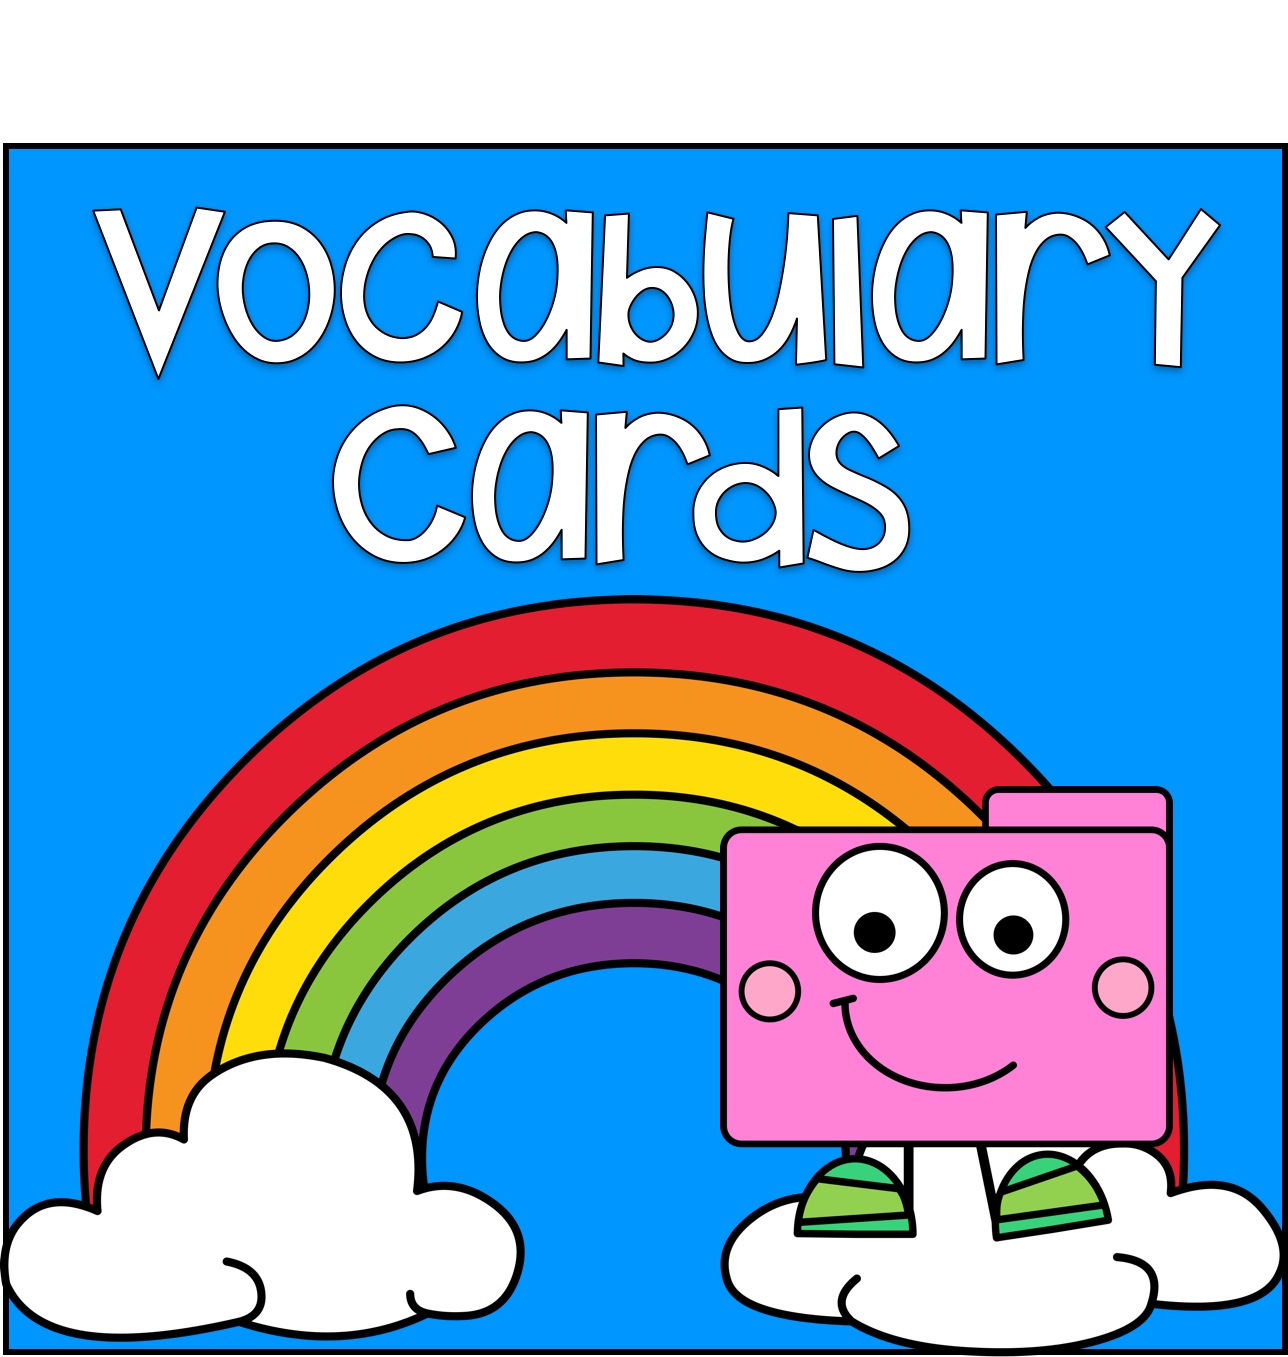 Vocabulary Cards File Folder Heaven Printable, HandsOn Fun with